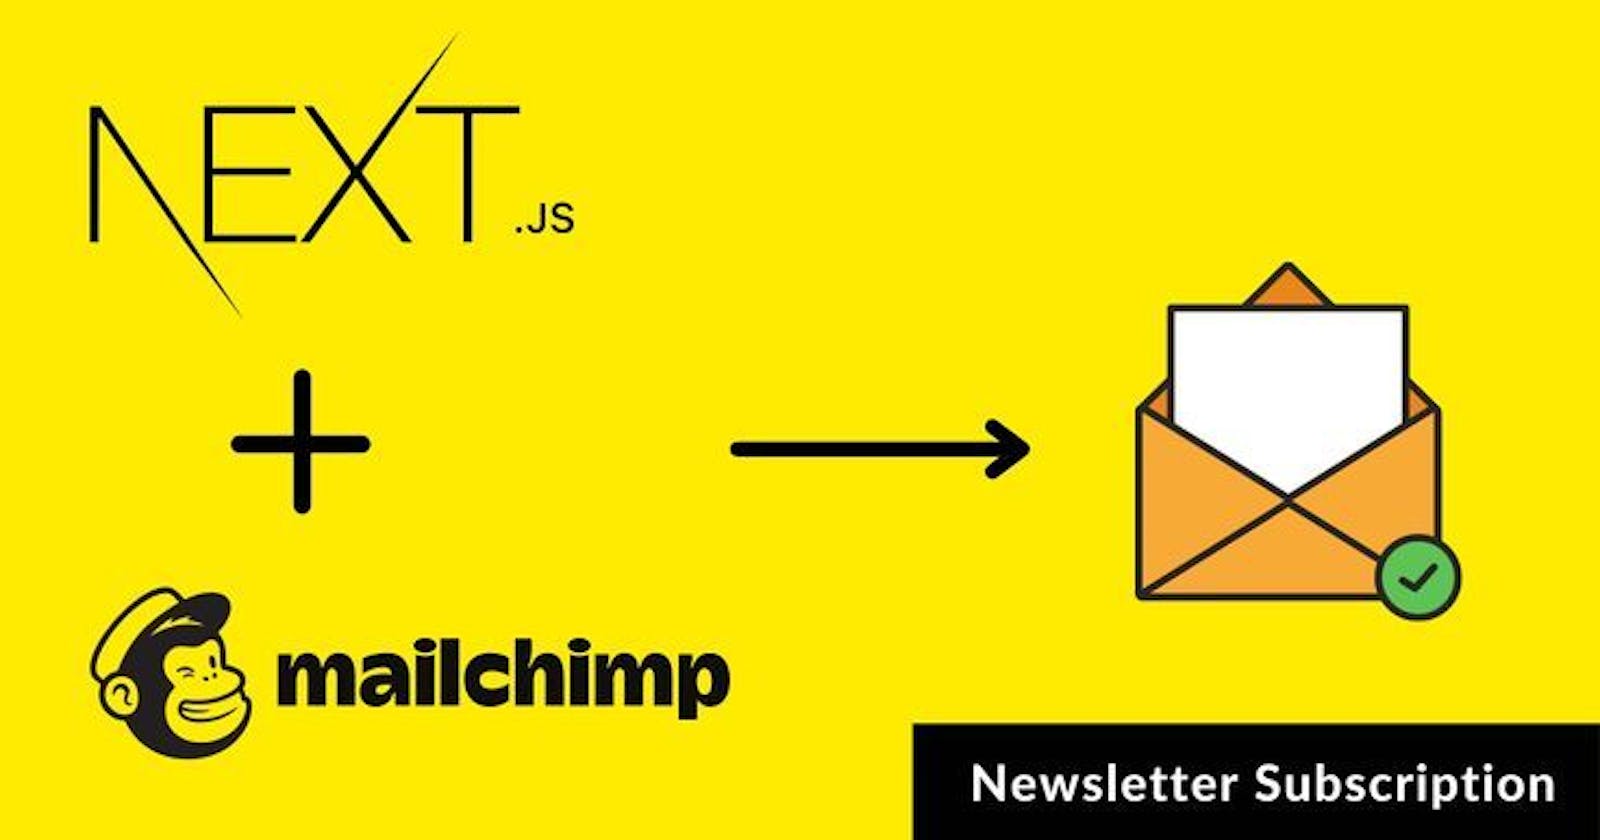 Newsletter Subscription using NEXT JS and Mailchimp API